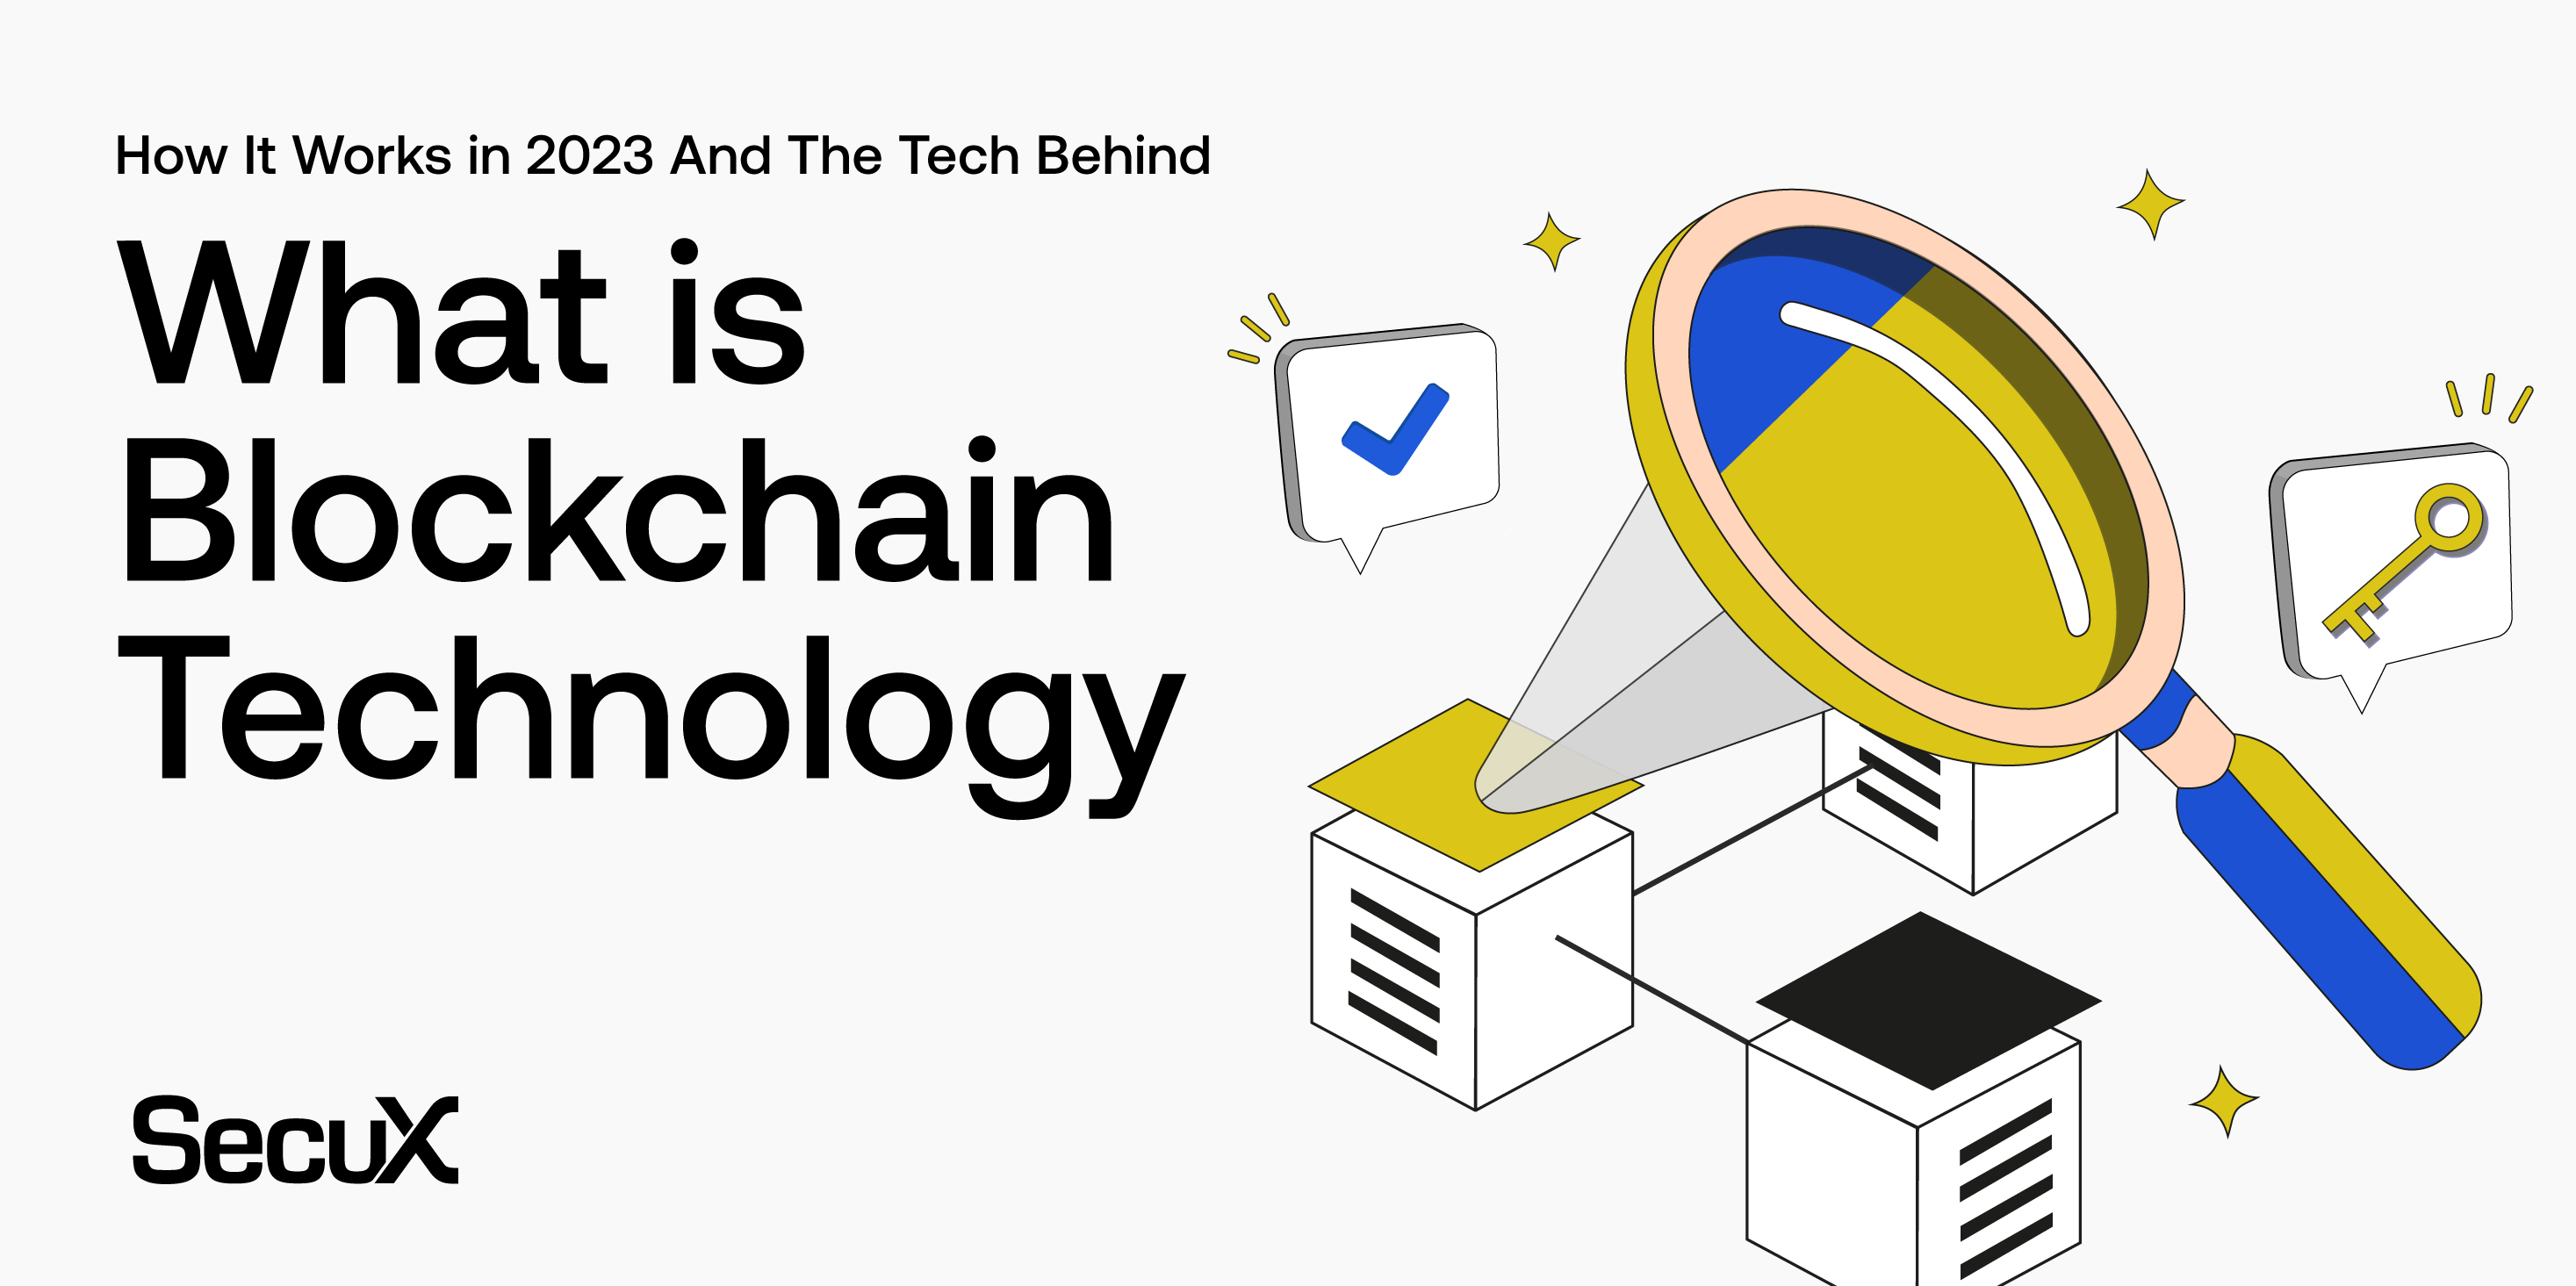 What Are Blockchains and the Tech Behind Them